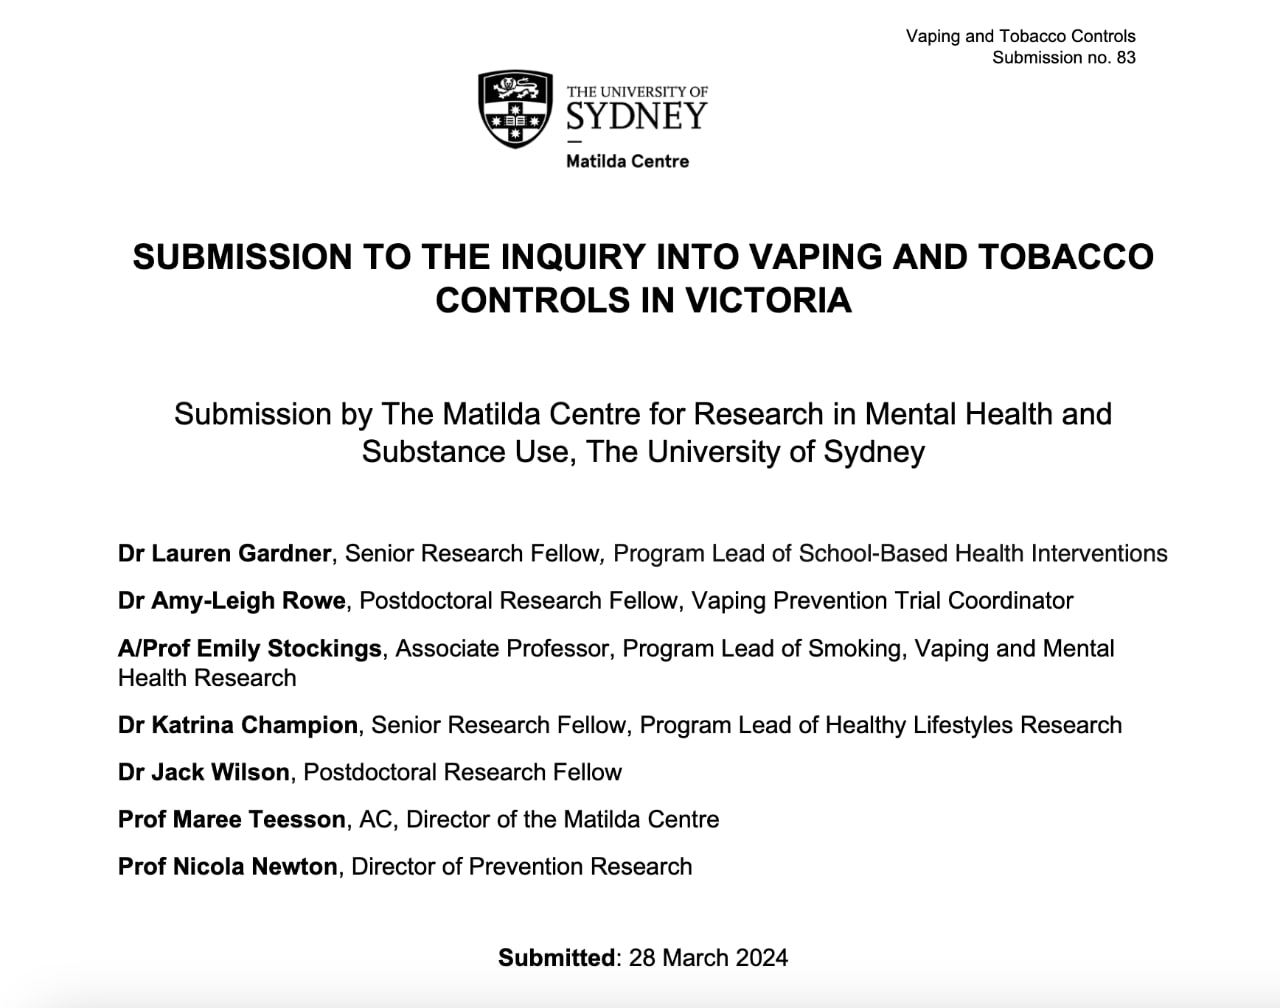 The title of the submission and the authors - Dr Lauren Gardner, Dr Amy-Leigh Rowe, Associate Professor Emily Stockings, Dr Katrina Champion, Dr Jack Wilson, Professor Maree Teesson and Professor Nicola Newton.